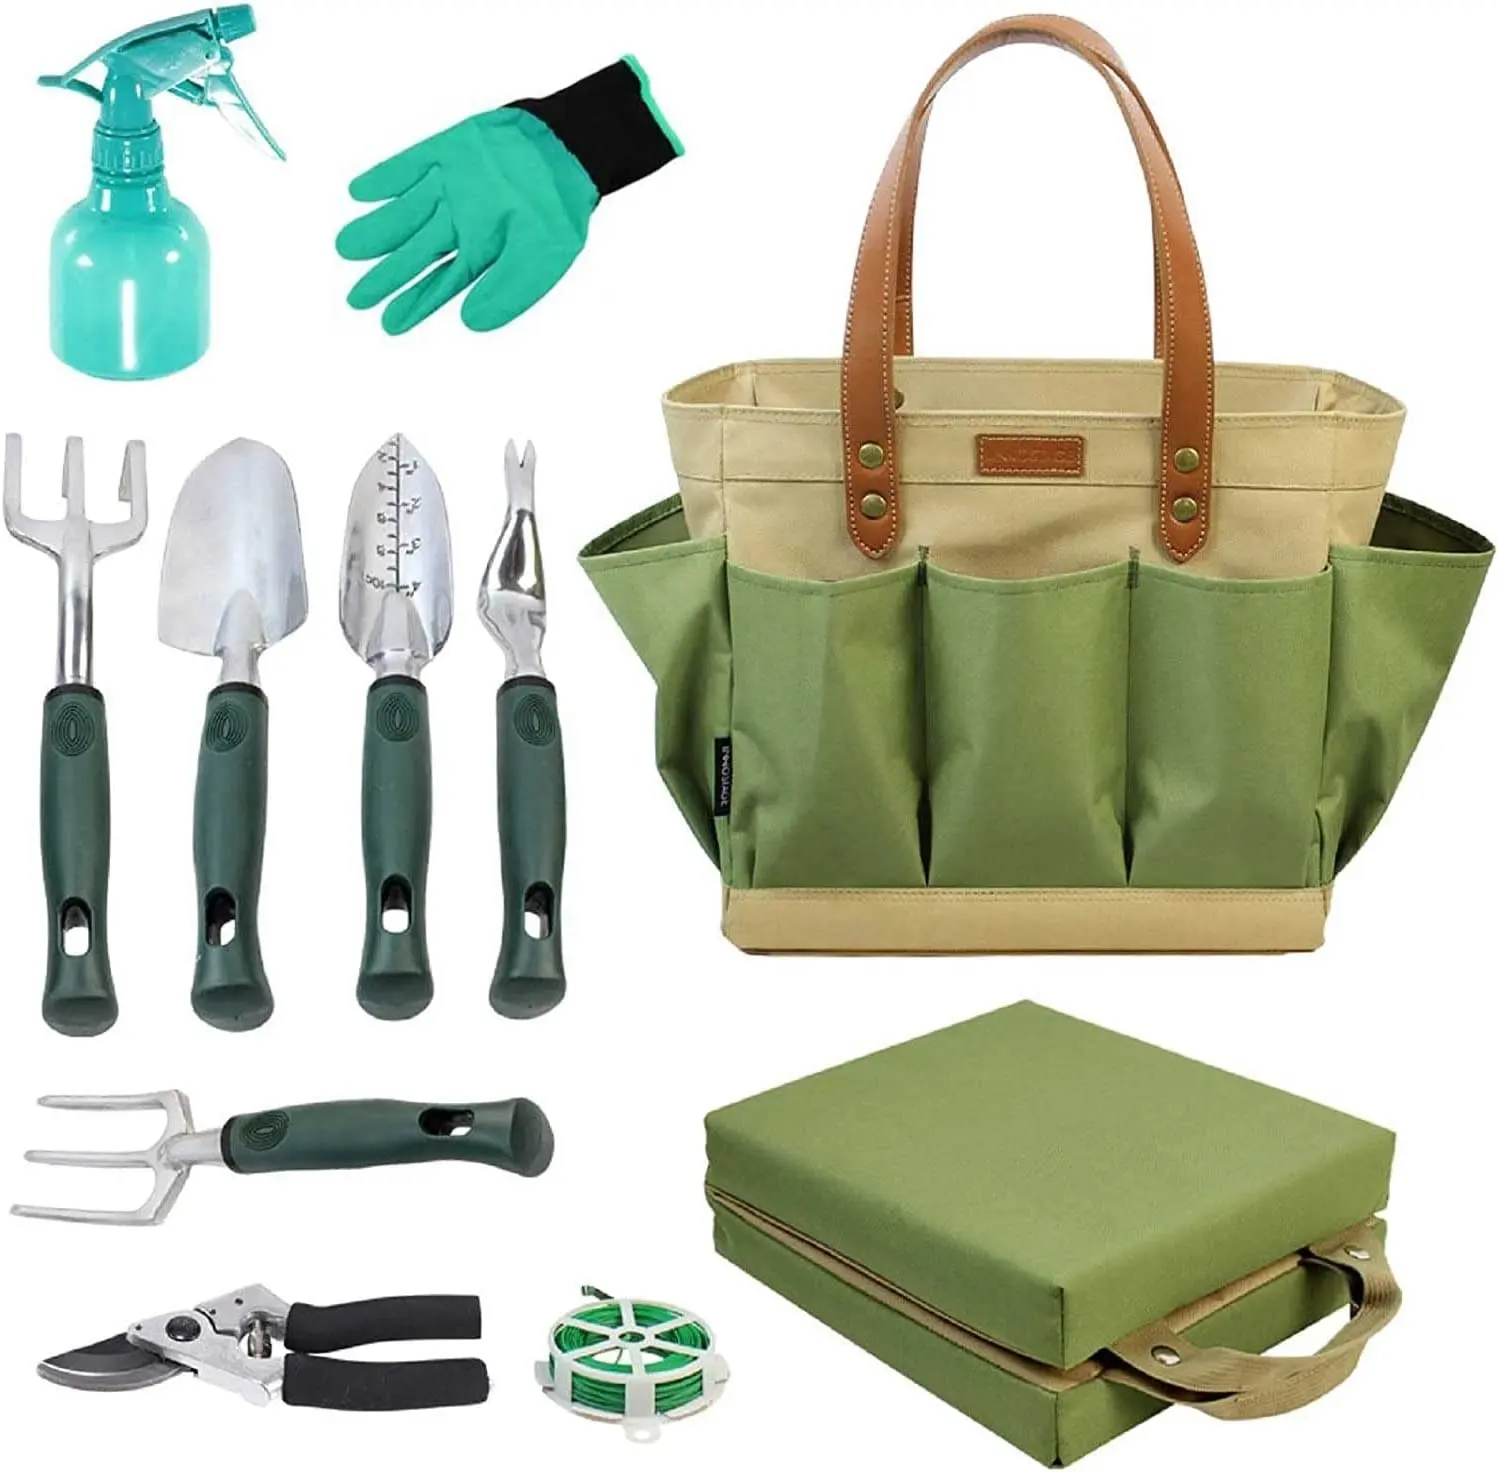 Garden Tool Tote Solid Bag with 11 Piece Hand Tools Best Gardening Gift Set Organizer with Vegetable Garden Tool Kit